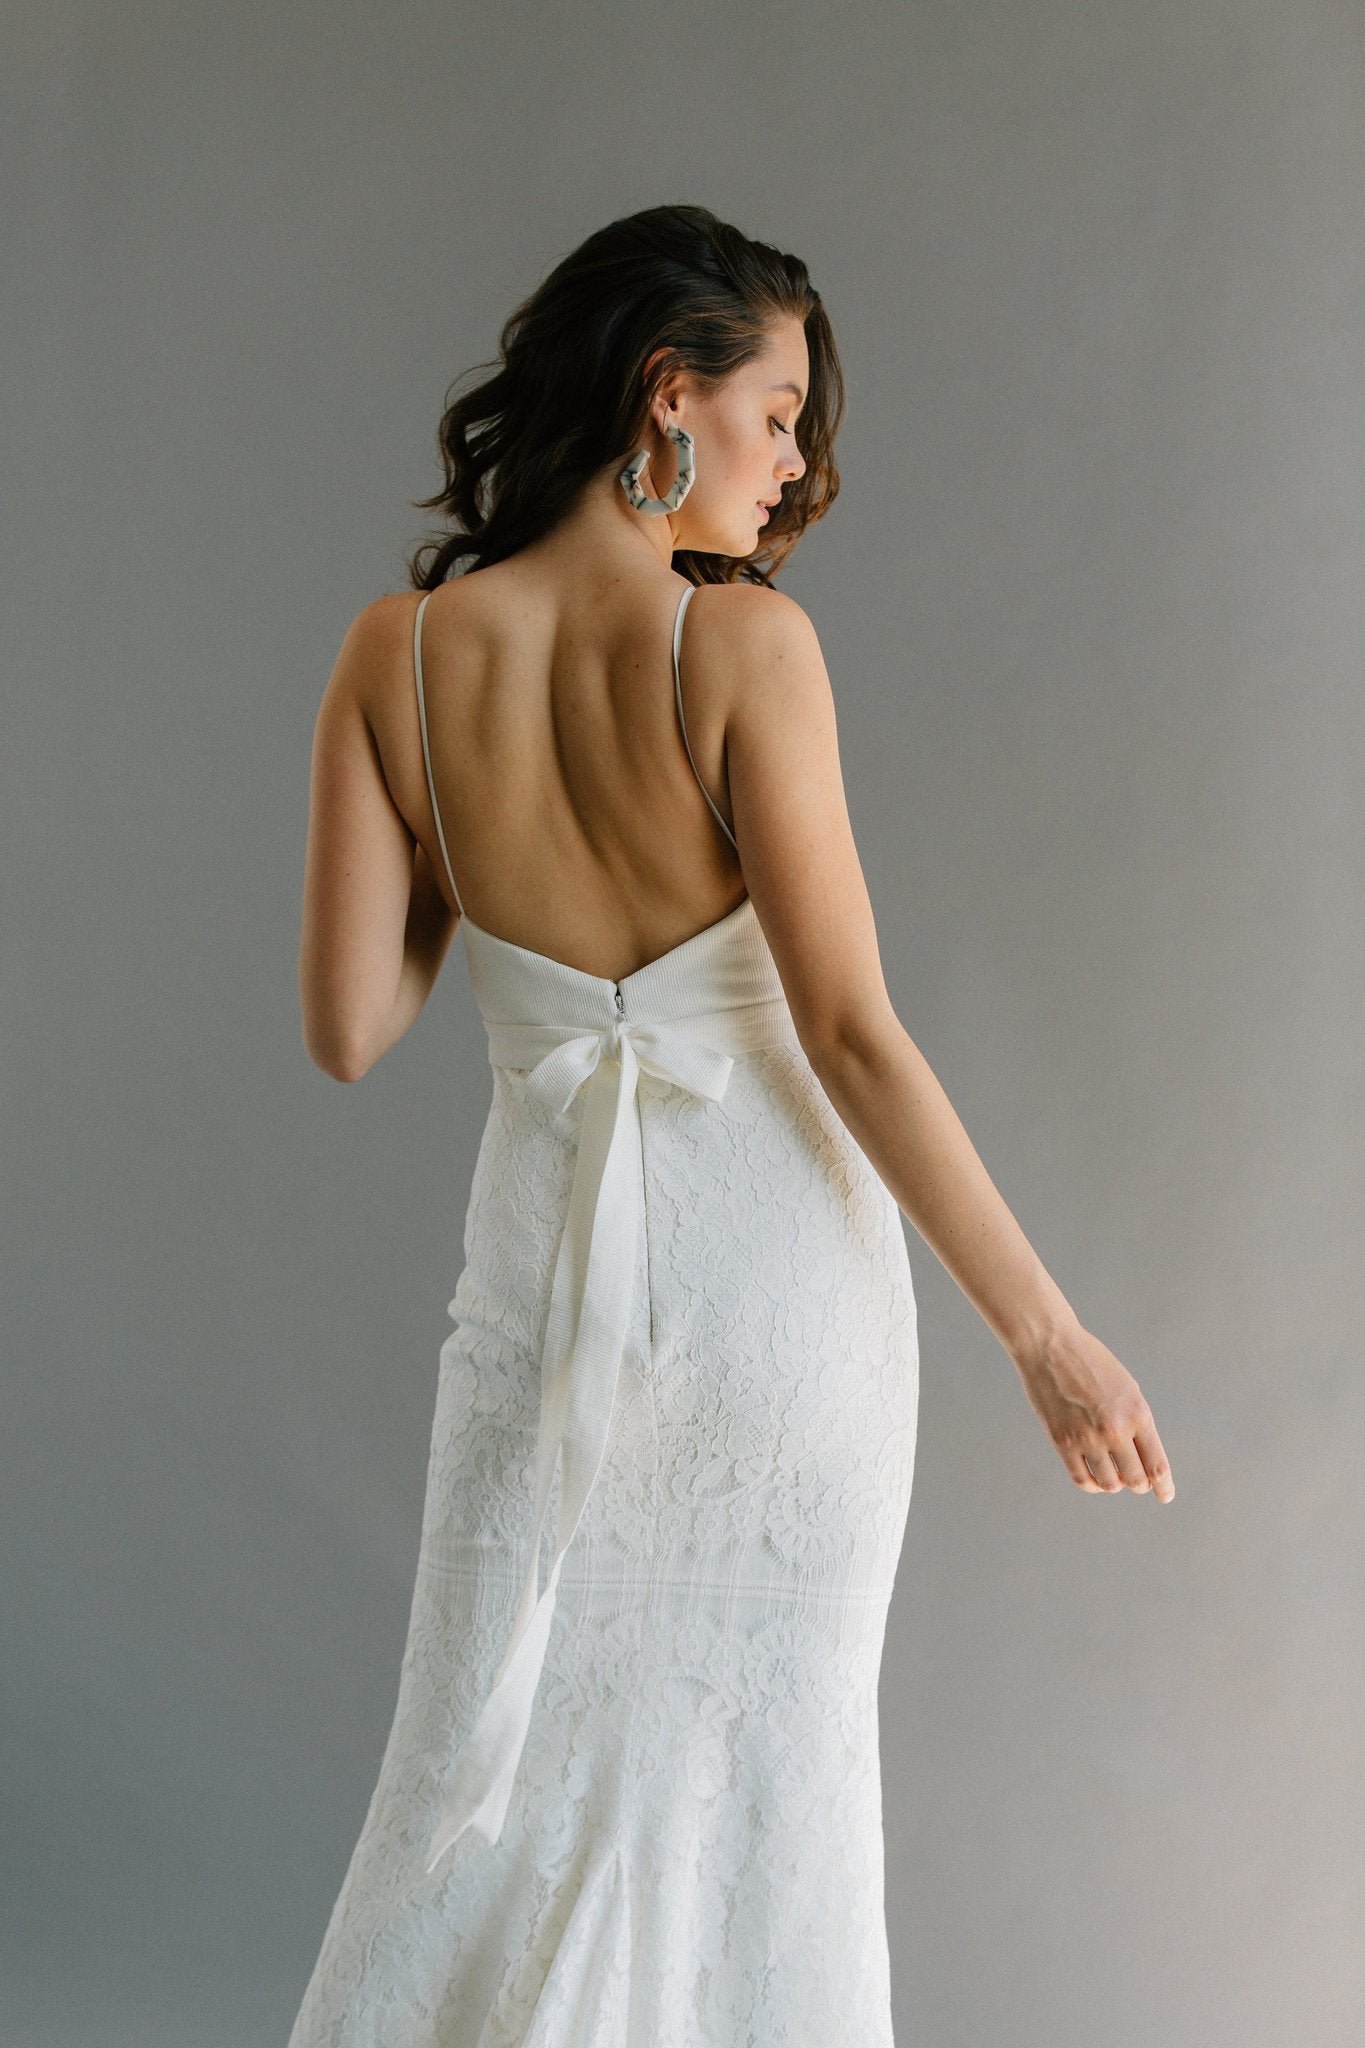 Affordable ethically-made wedding dresses handmade in Vancouver, Canada